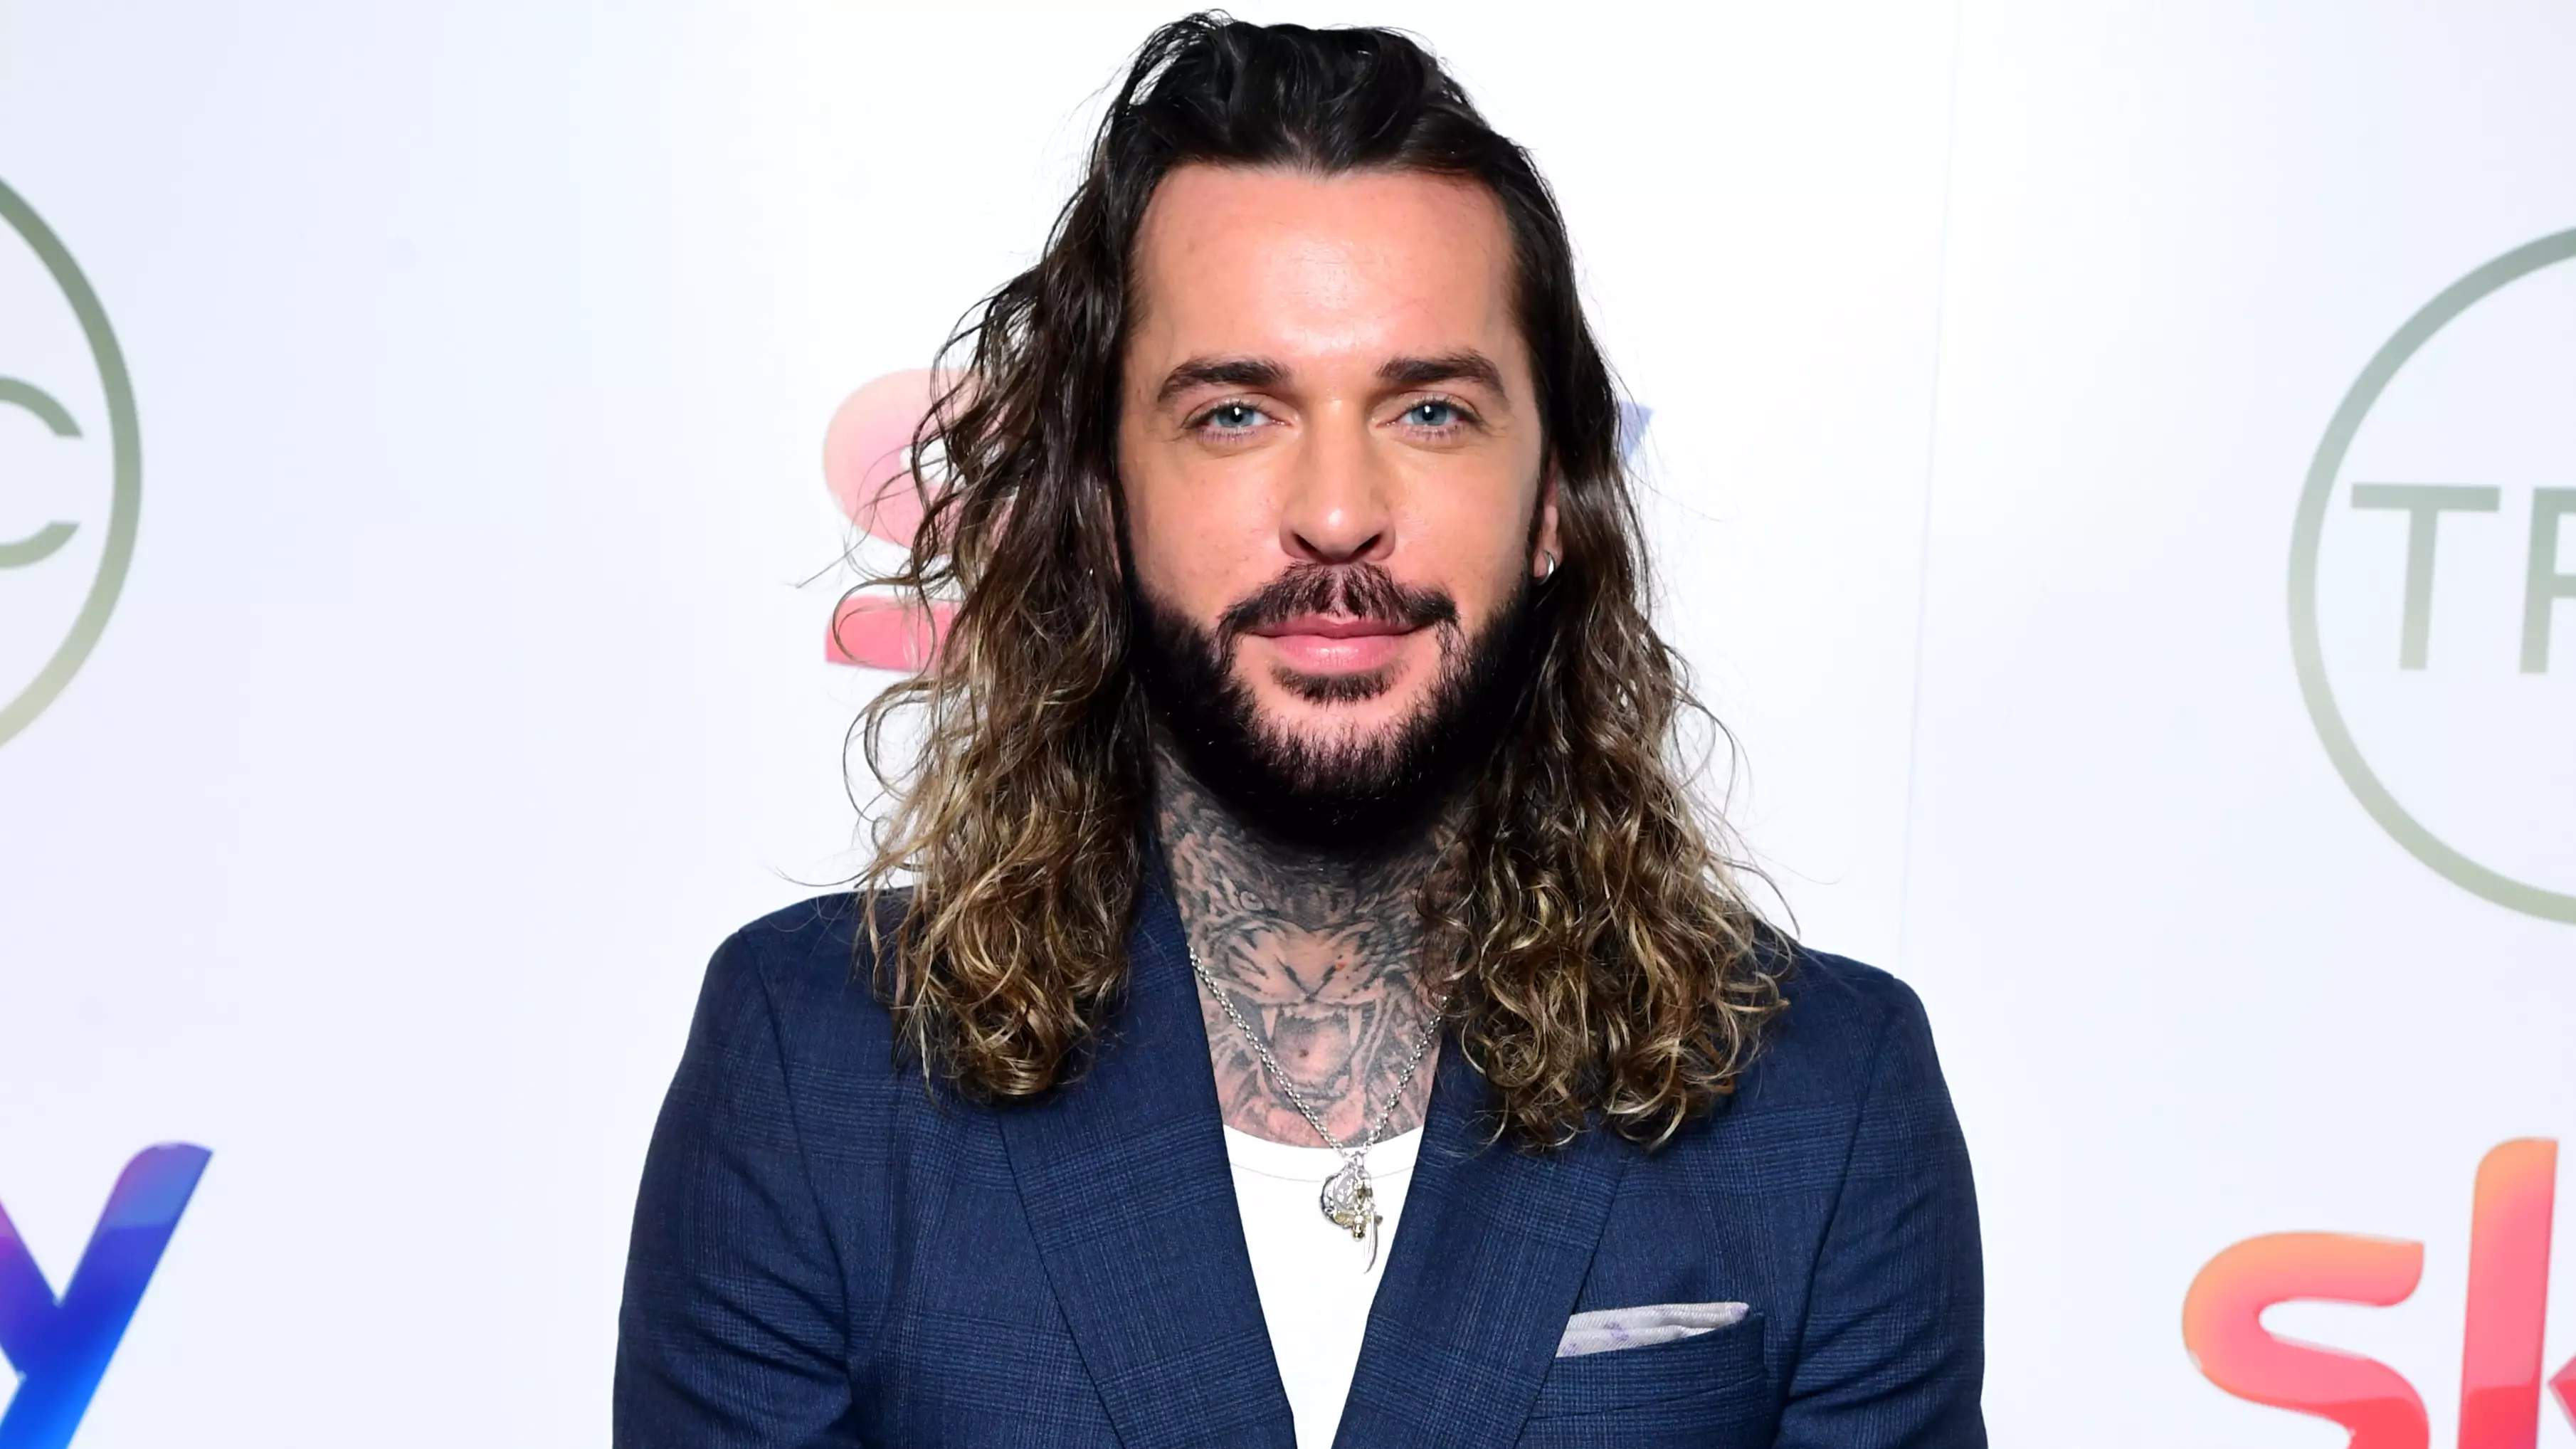 ‘TOWIE’ Star Pete Wicks Reveals Secret Two-Year Romantic Relationship With Co-Star Chloe Sims